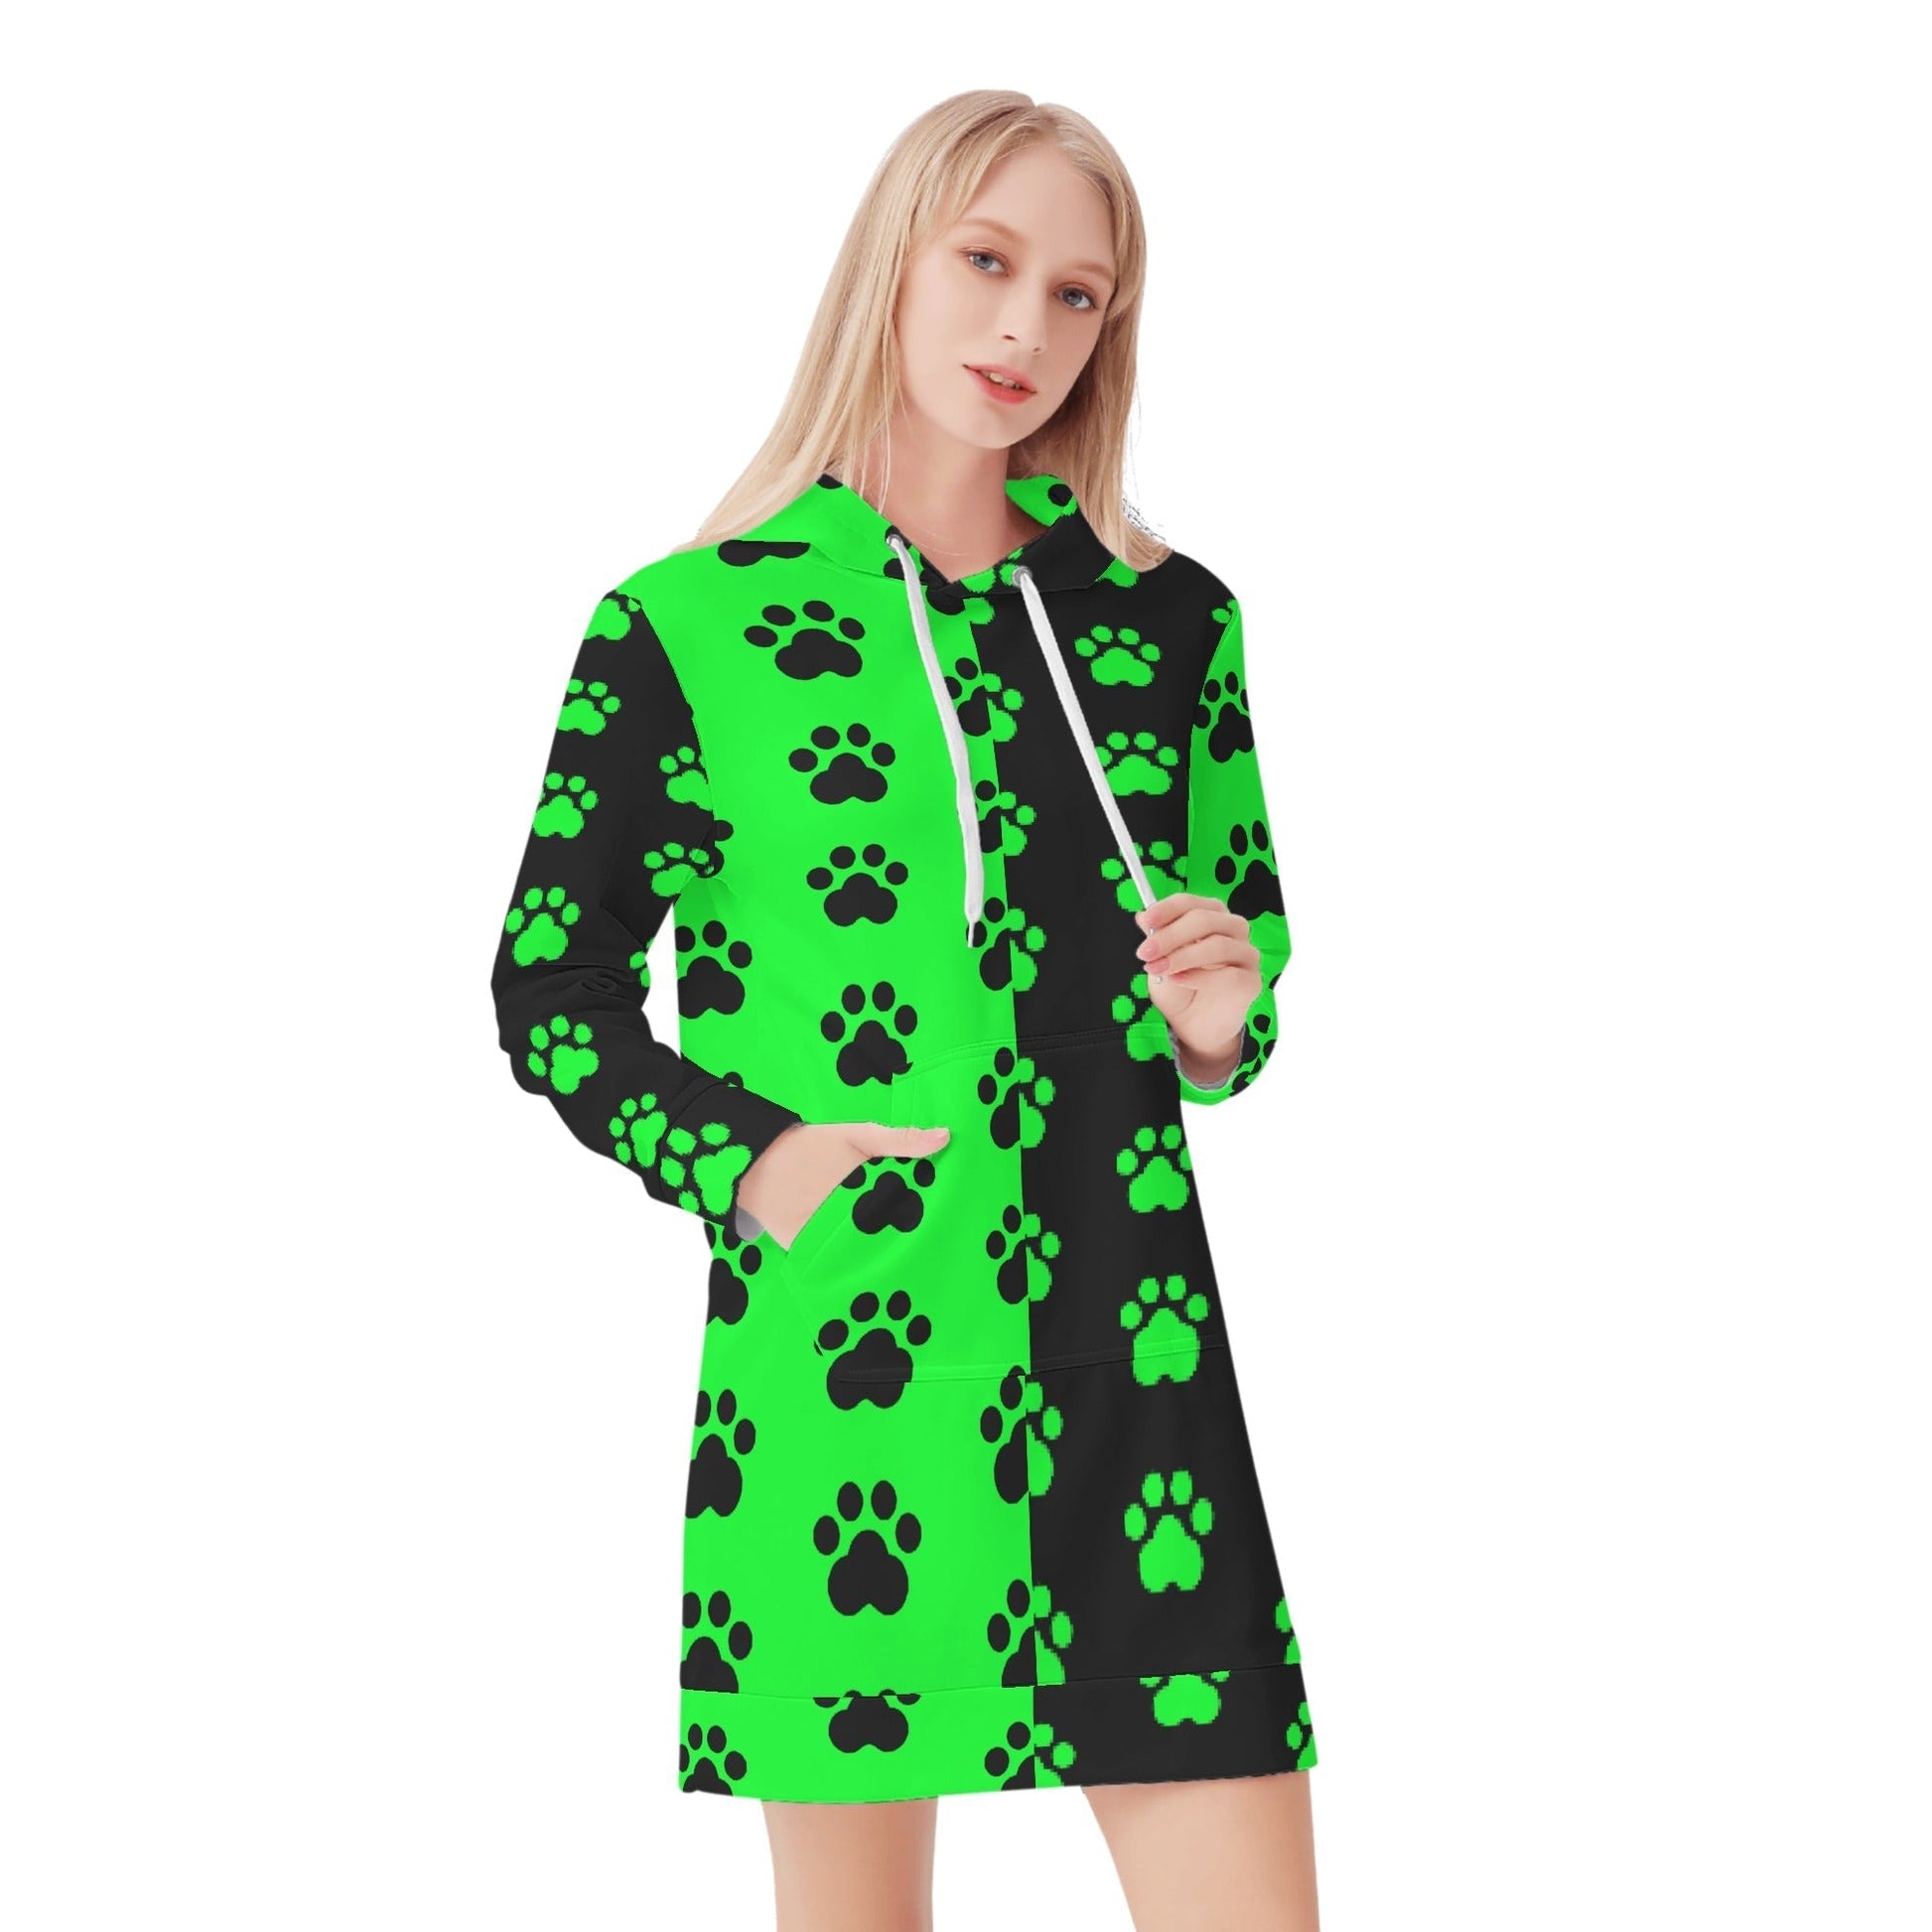 Stand out  with the  2 Tone Womens Hoodie Dress  available at Hey Nugget. Grab yours today!